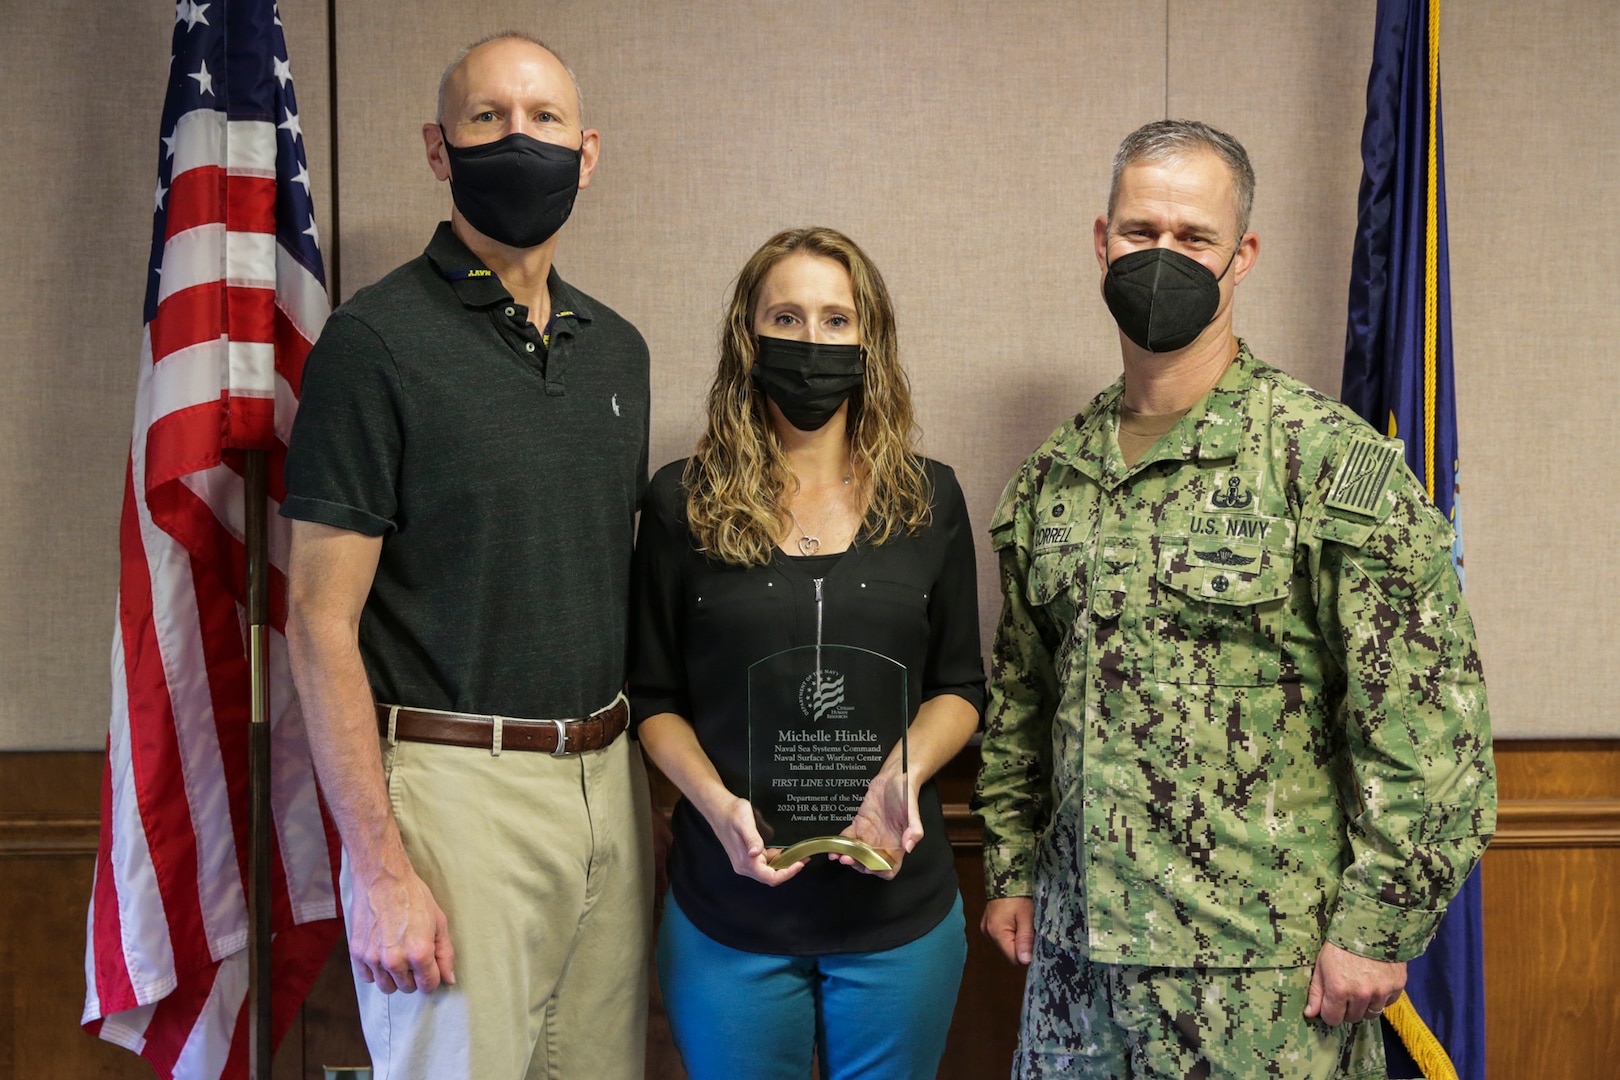 NSWC IHD employee Michelle Hinkle is presented the Department of Navy Human Resources and Equal Employment Opportunity Community Award for Excellence in the First Line Supervisor category by Technical Director Ashley Johnson and Commanding Officer Capt. Eric Correll on Sept. 14.